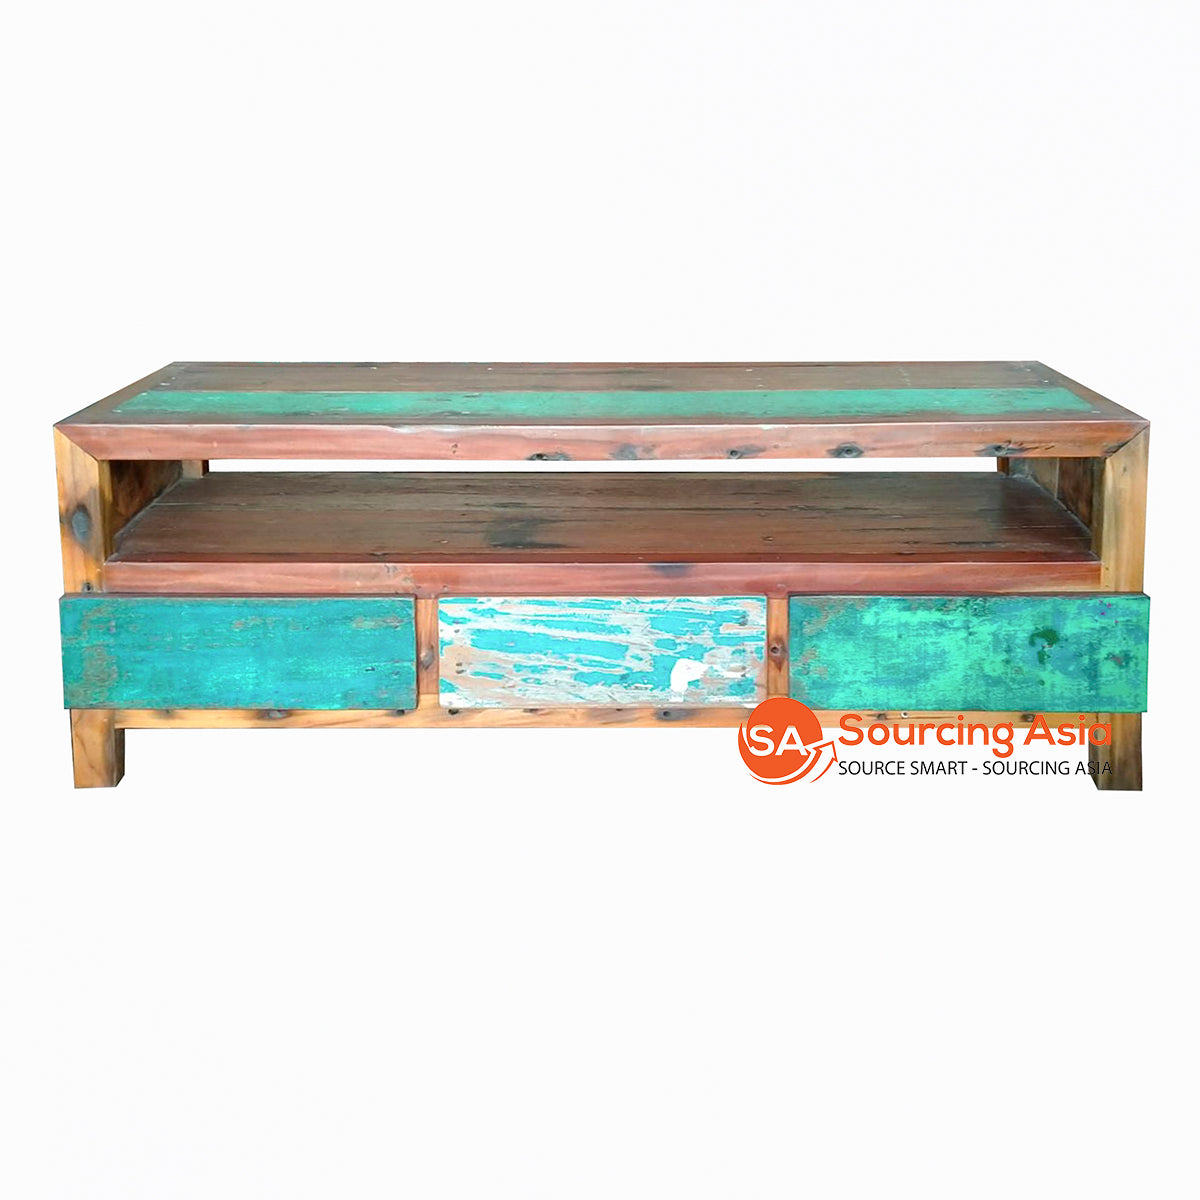 FAK49 RECYCLED BOAT TV CABINET